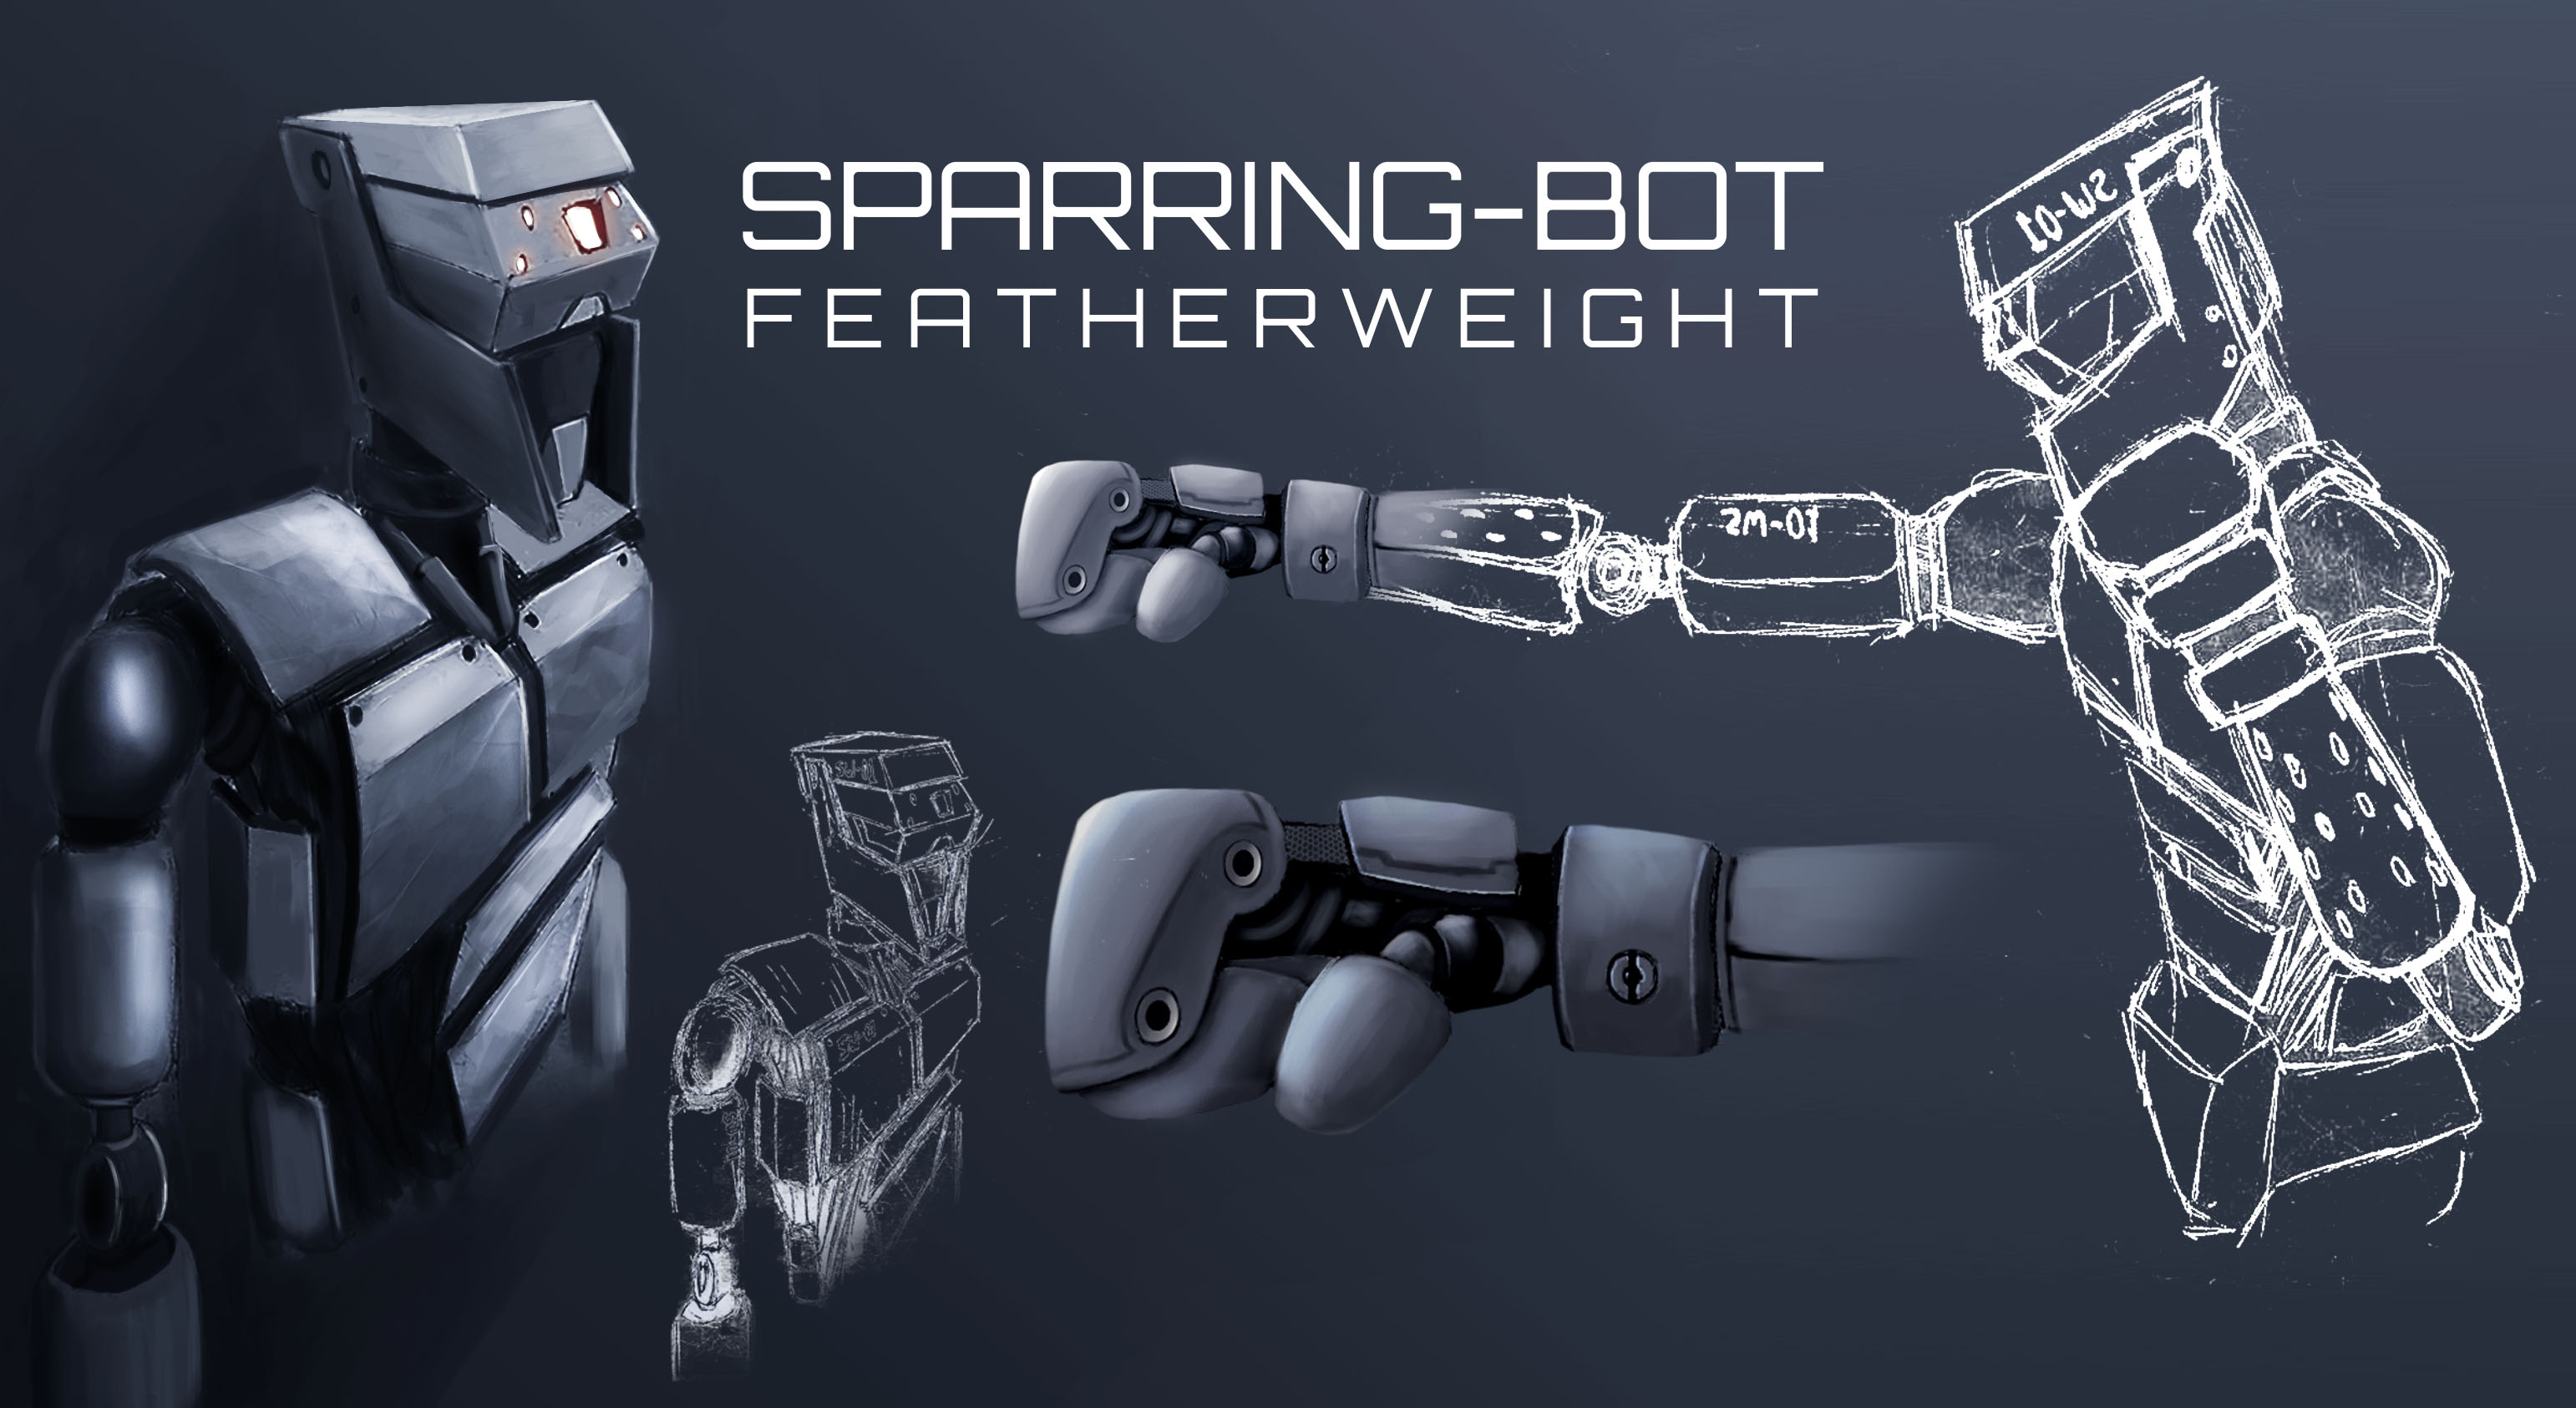 Sparring Bot Character Design
  
  <p>CONCEPT:  Design a Robot meant to spar with Feather weight class boxers.</p>
  <p>HOW DESIGN SOLVES PROBLEMS,: I used recognizable designs like the boxing gloves and head is similar to sparring headgear.</p>
  <p>PROCESS: research ,Sketched on sketchbook, scanned and refined on Photoshop.</p>
  <p>TOOLS USED: pen/paper Photoshop</p>
  <p>CHALLENGES: Understanding the weight class and body type that this robot needs to be suitable for these type of boxers.</p>
  